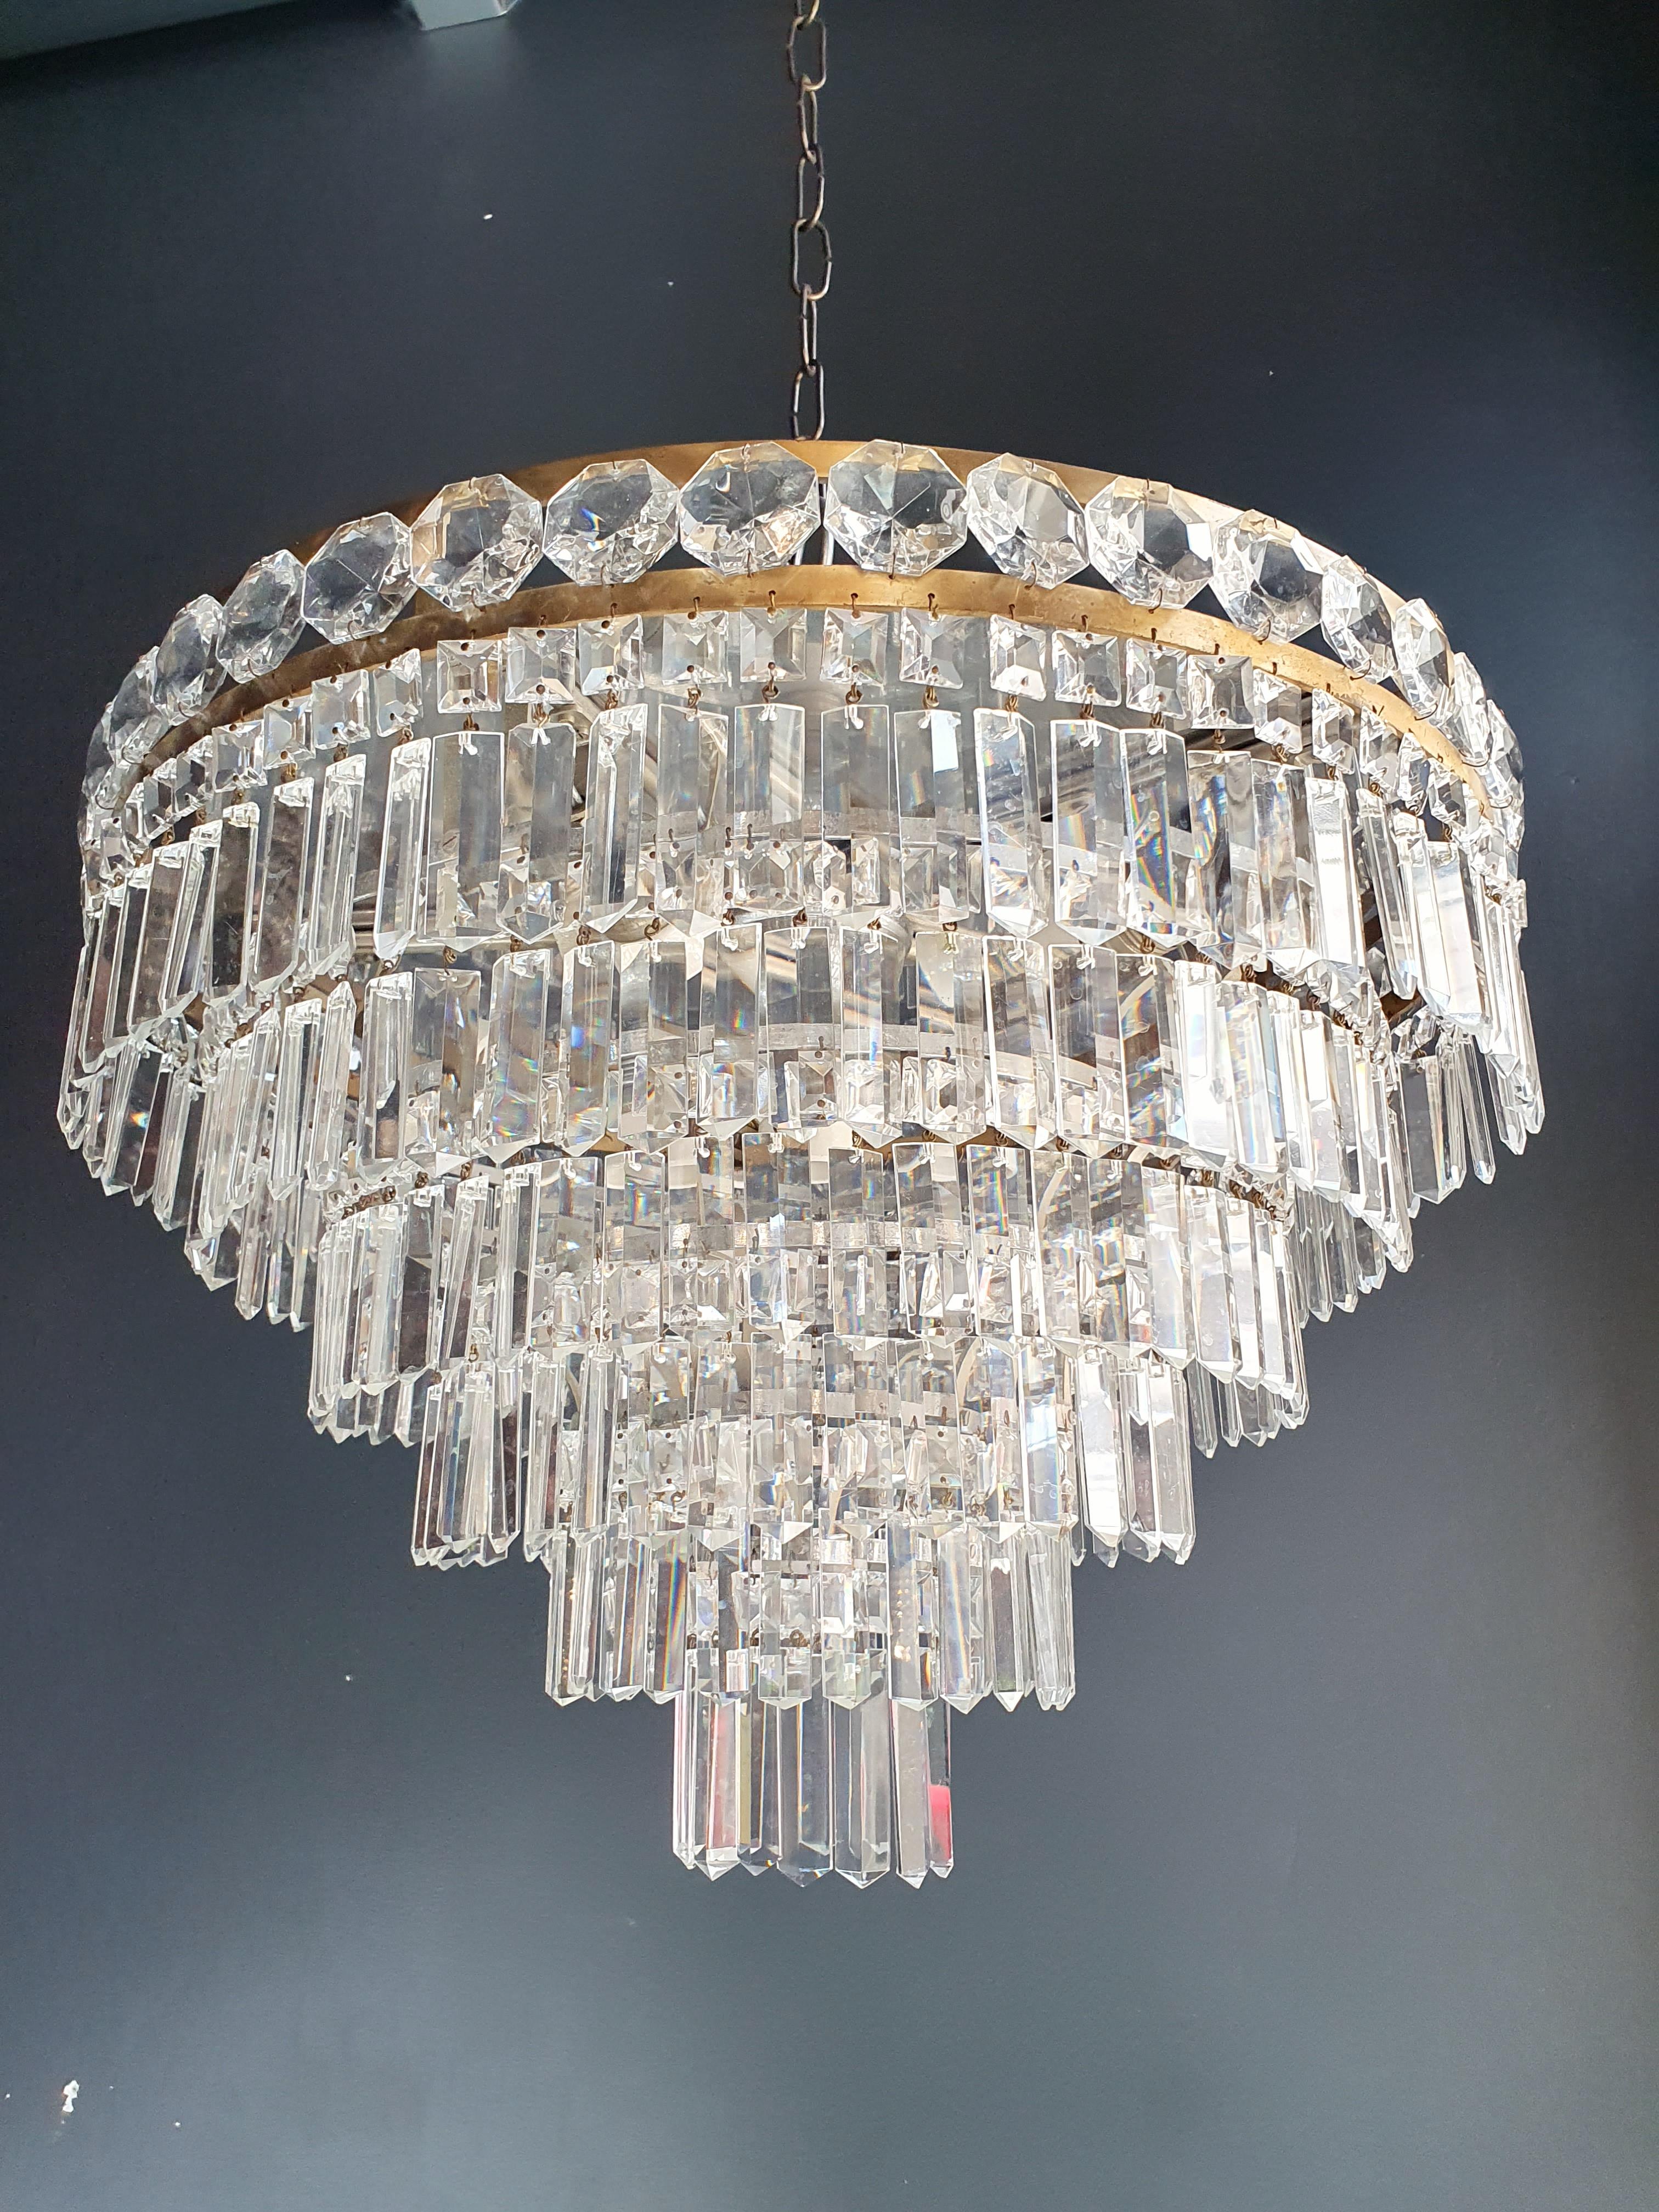 Low ceiling crystal chandelier brass.
Cabling completely renewed. Crystal hand knotted.
Measures: Total height 65cm, height without chain 43 cm, diameter 54 cm. weight (approximately) 8 kg.

Number of lights: 6-light bulb sockets: E27

Rewired